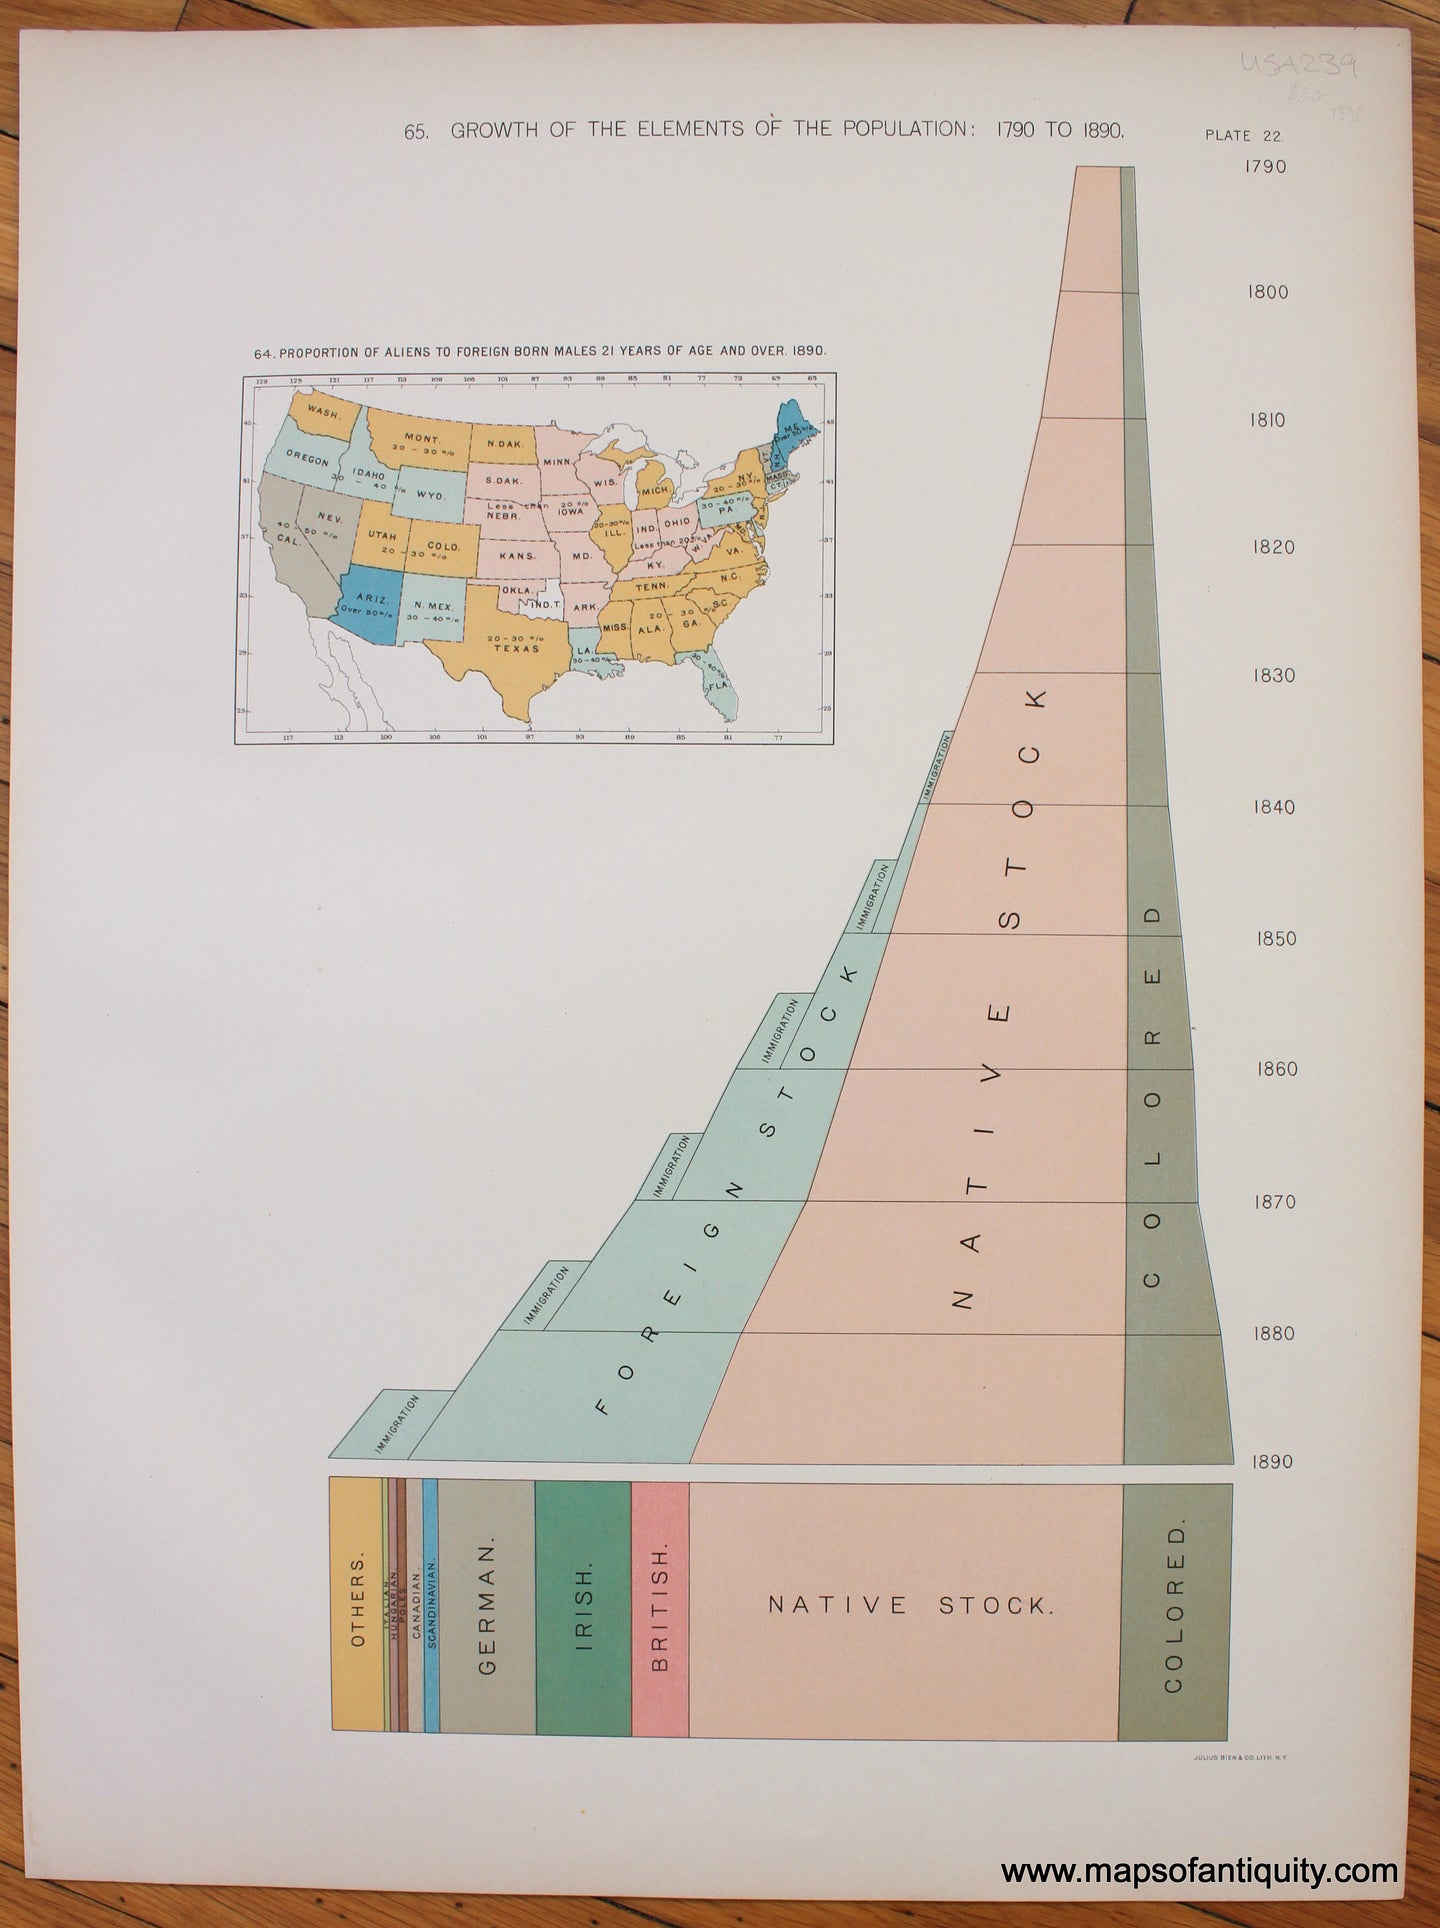 Maps-Antiquity-Antique-Map-Statistcal-Atlas-United-States-America-USA-1898-Eleventh-Census-Gannett-Growth-Elements-Population-1790-1890-Native-Stock-Colored-British-Irish-German-Scandinavian-Canadian-Poles-Hungarian-Italian-Others-Foreign-Born-Proportion-Aliens-Males-21-Years-Age-Over-Diagram-Chart-Graph